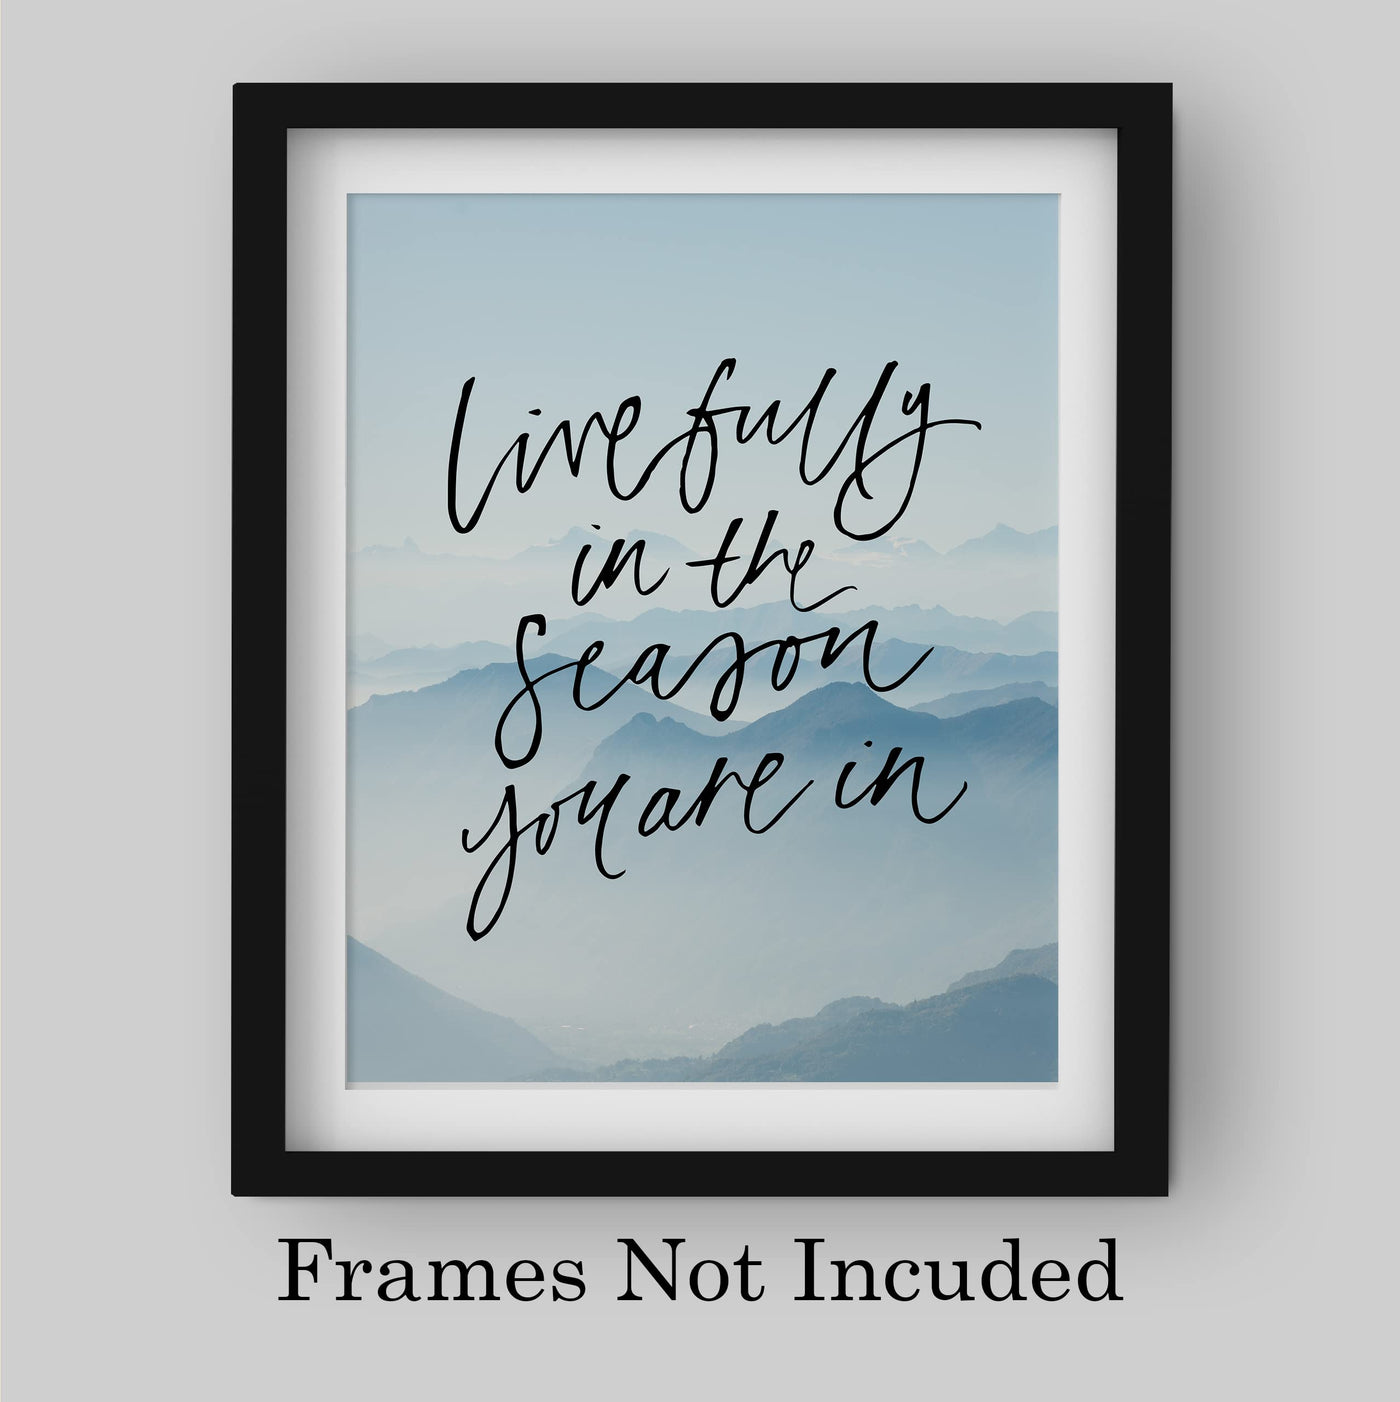 Live Fully In the Season You Are In-Inspirational Quotes Wall Art -8 x 10" Mountain Photo Print -Ready to Frame. Motivational Home-Office-School Decor. Great Gift of Inspiration & Motivation!